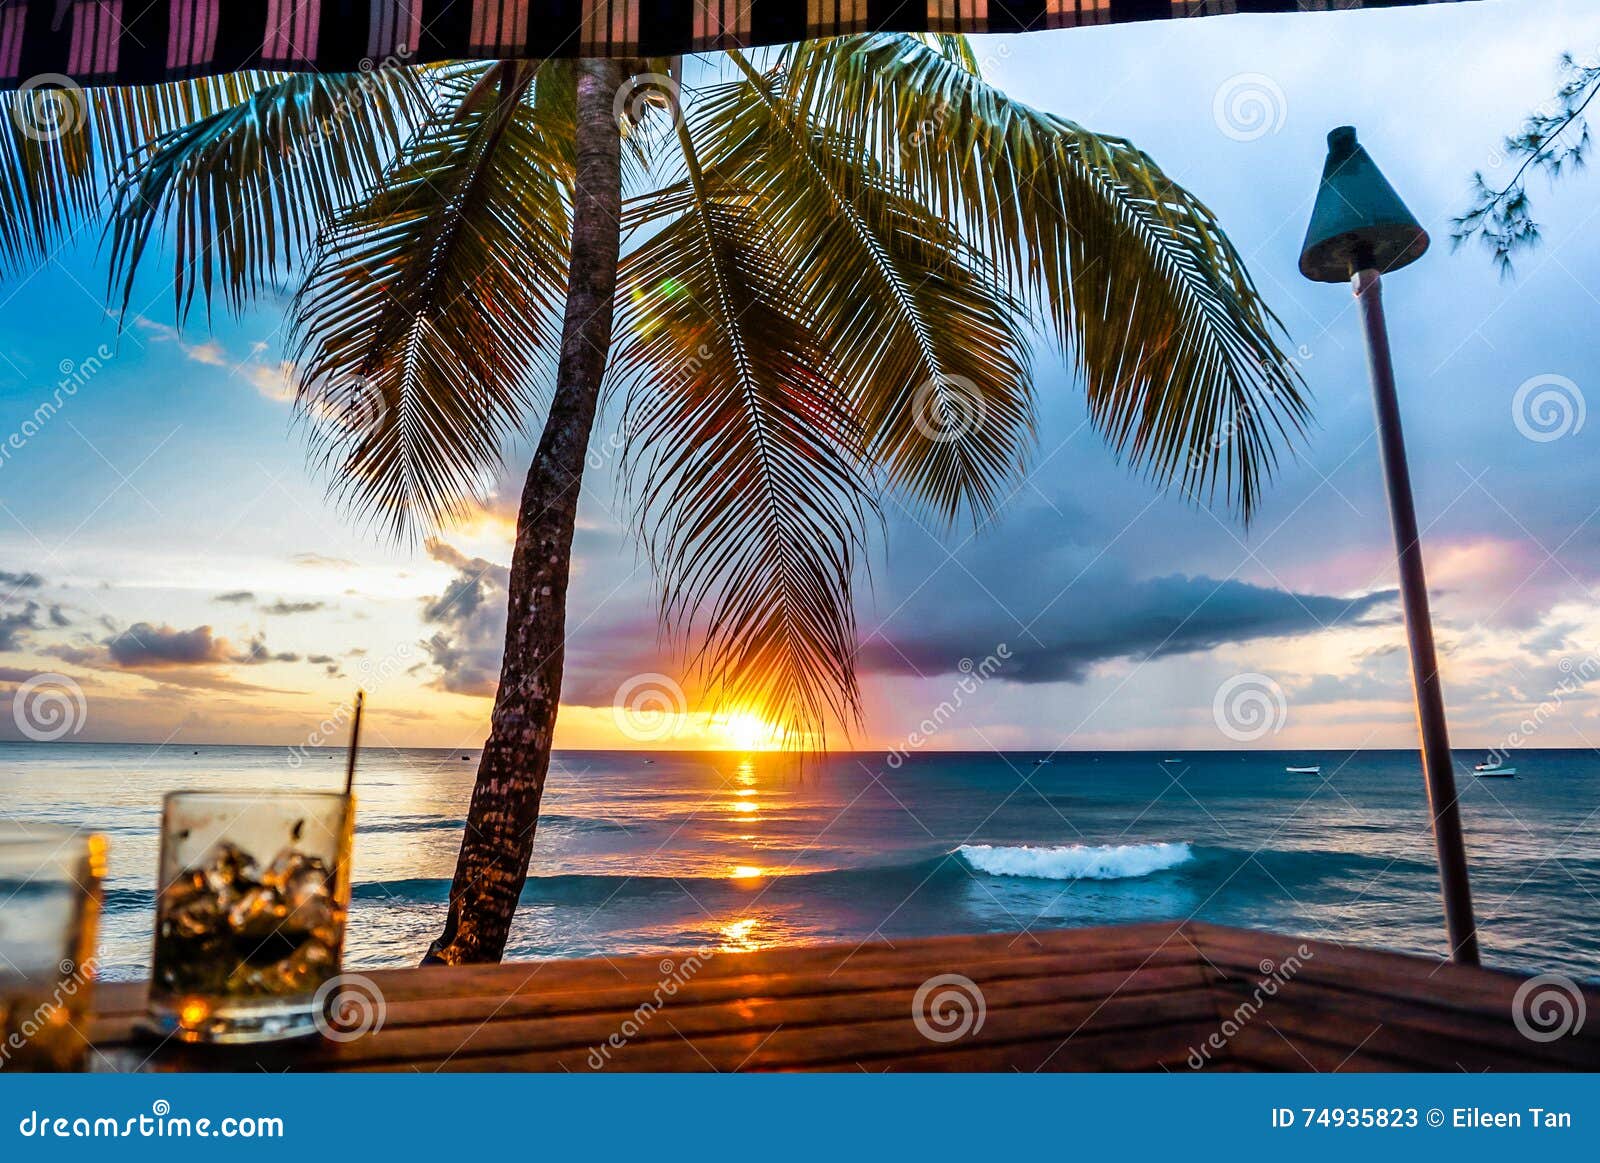 Sunset View Of Barbados Beach Stock Image Image Of View Golden 74935823